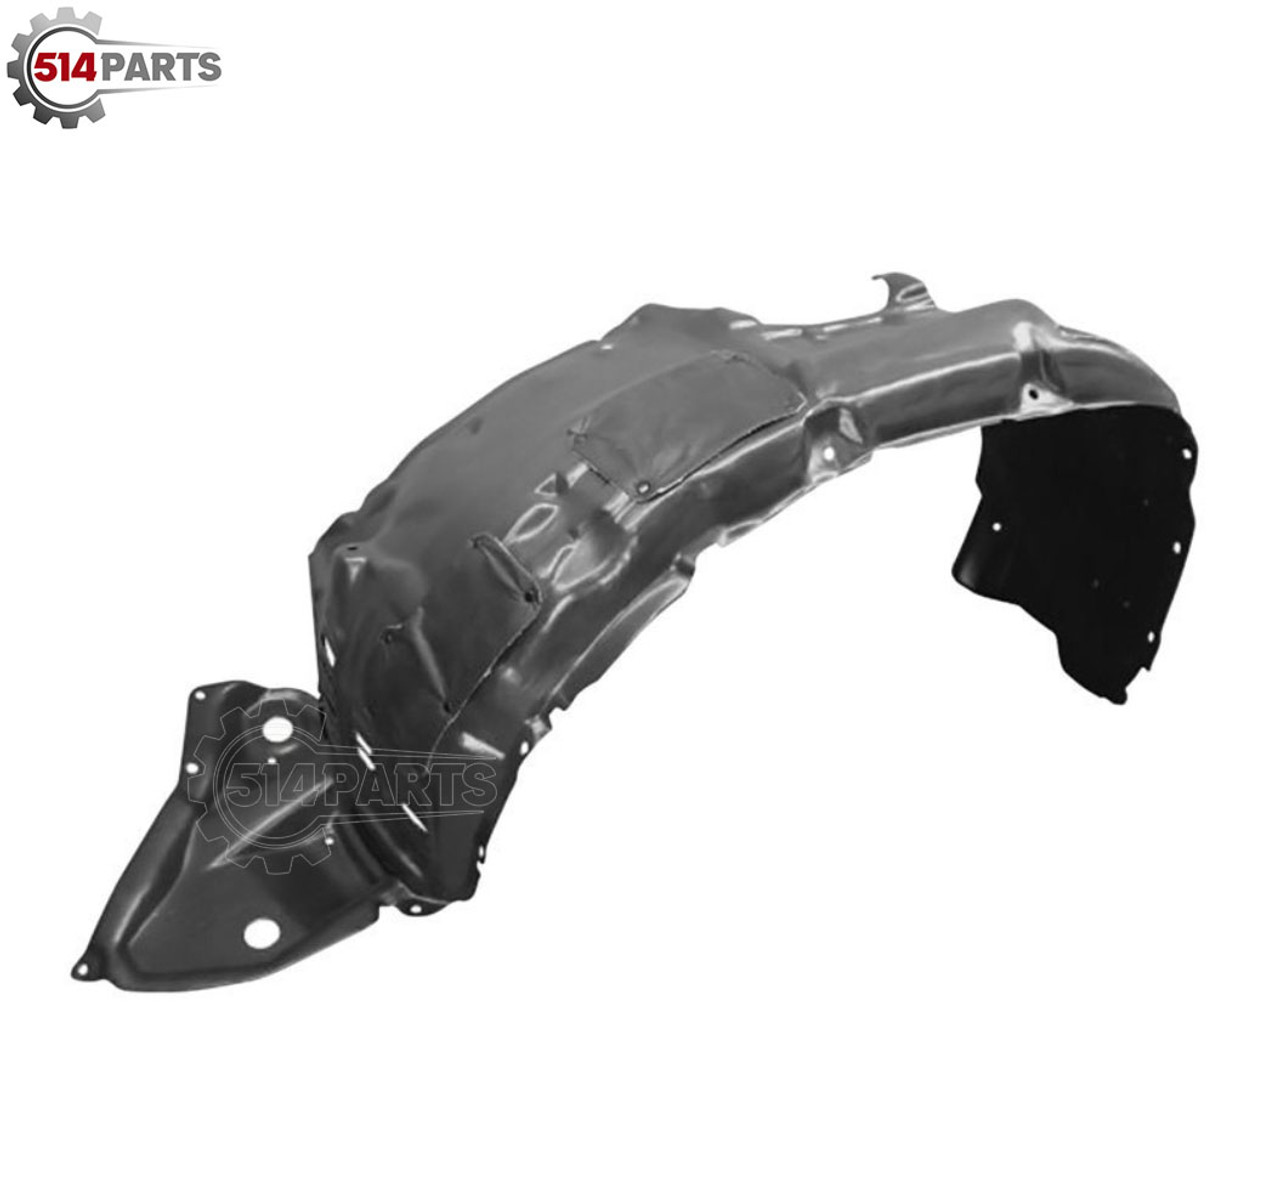 2014 - 2019 TOYOTA HIGHLANDER 3.5L FENDER LINER with INSULATUON FOAM - FAUSSE AILE